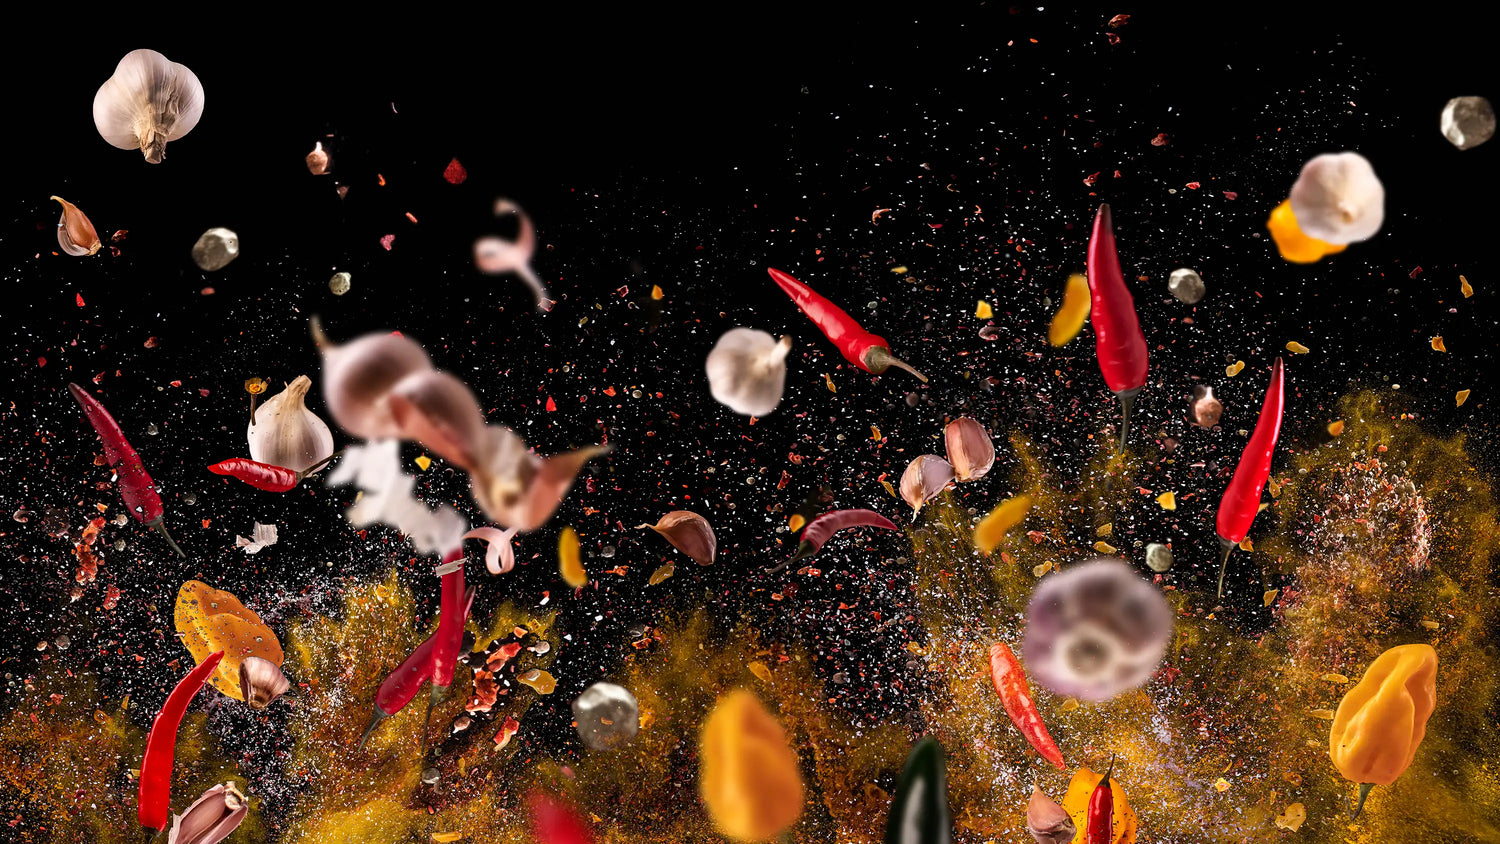 Red peppers, garlic, and spices flying through the air with a black background